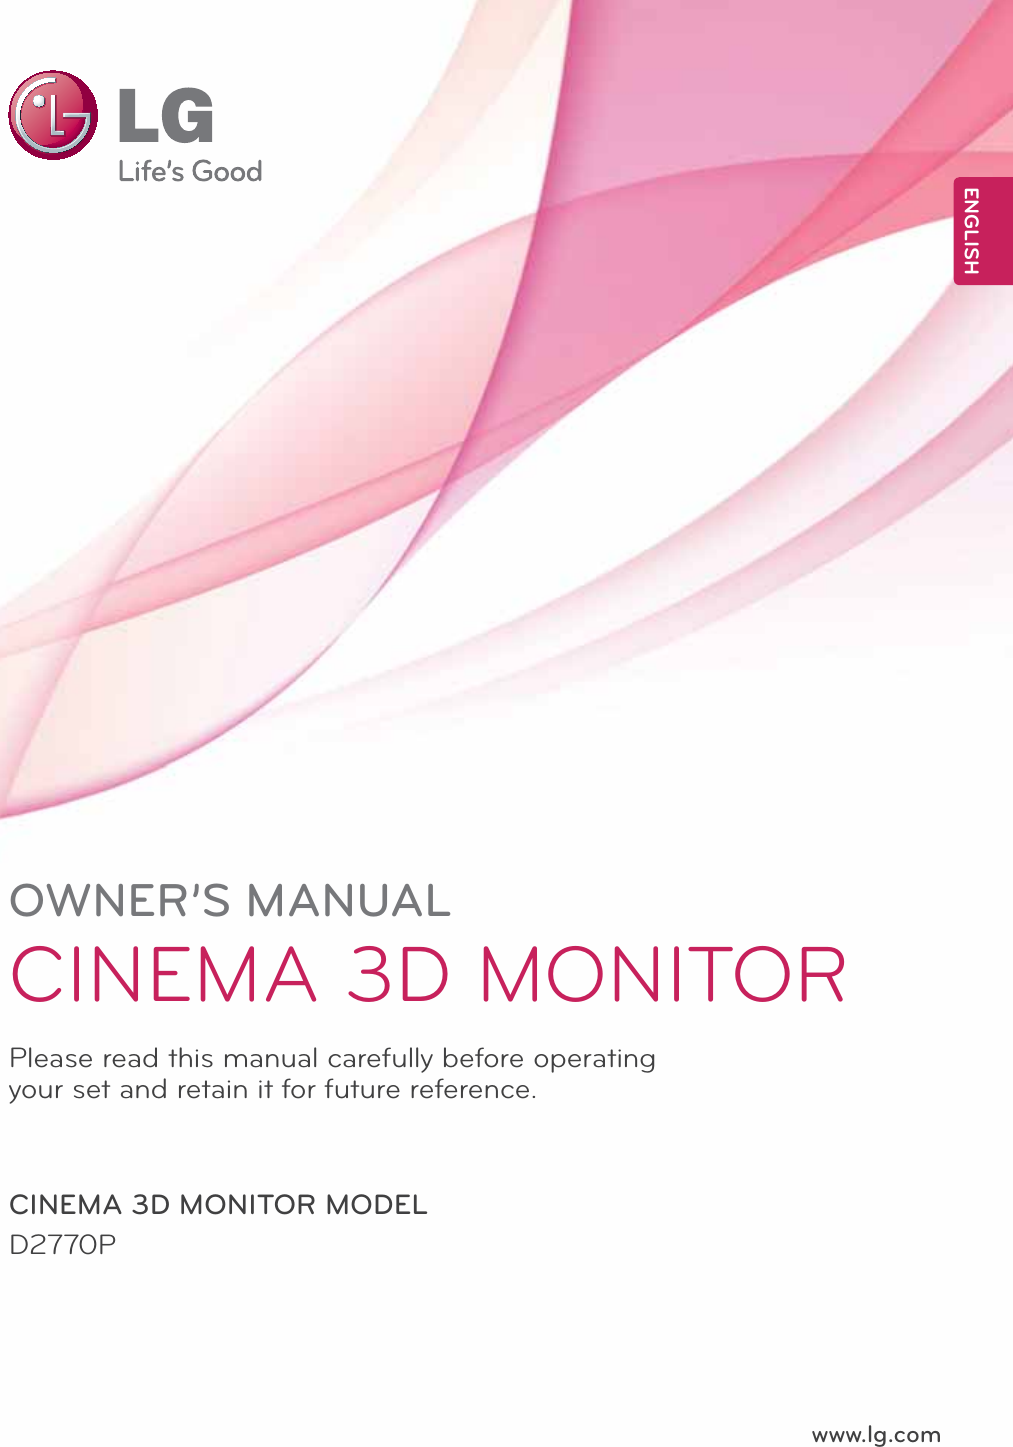 www.lg.comOWNER’S MANUALCINEMA 3D MONITORD2770PPlease read this manual carefully before operating your set and retain it for future reference.CINEMA 3D MONITOR MODELENGLISH